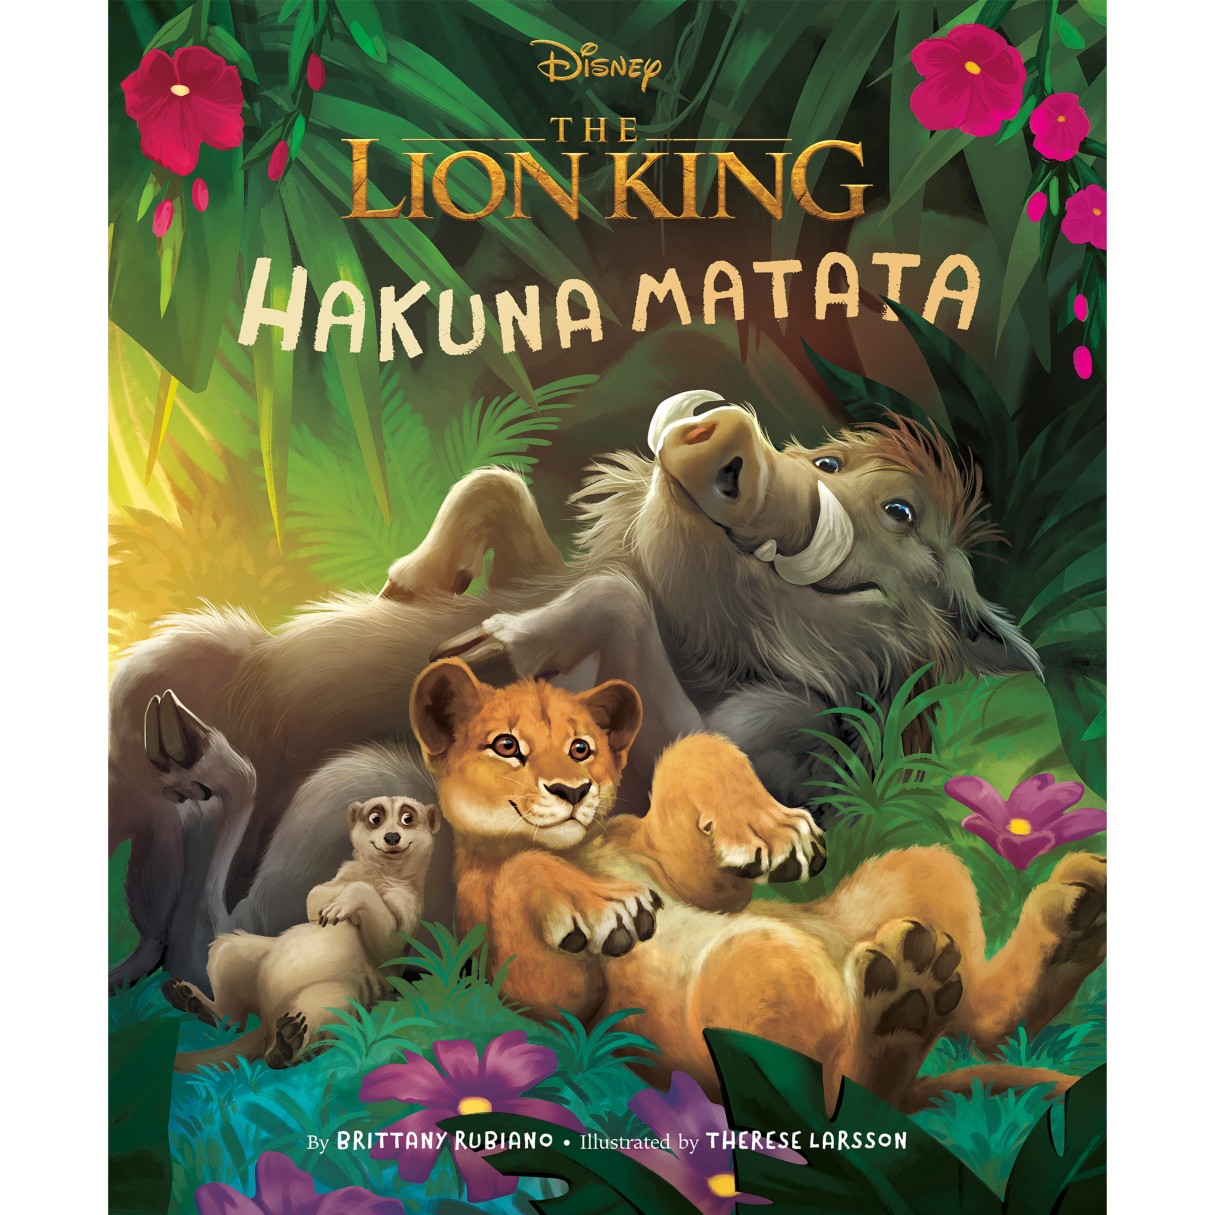 The Lion King Picture Book: Hakuna Matata Book – The Lion King 2019 Film